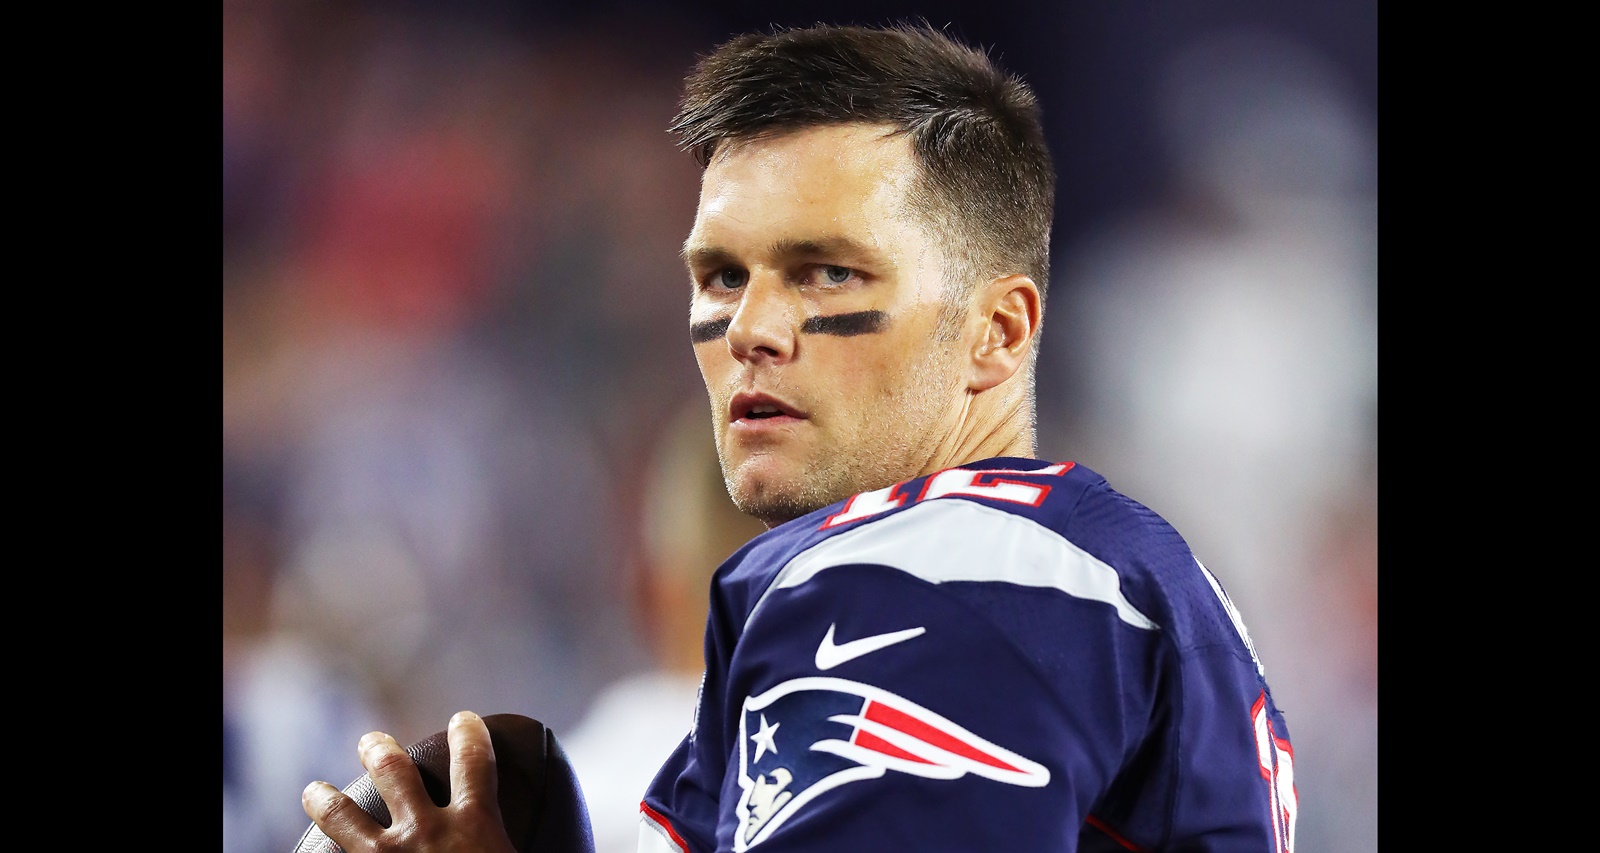 Tom Brady Net Worth 2019: How Rich Does the Quarterback’s New Contract Make Him?